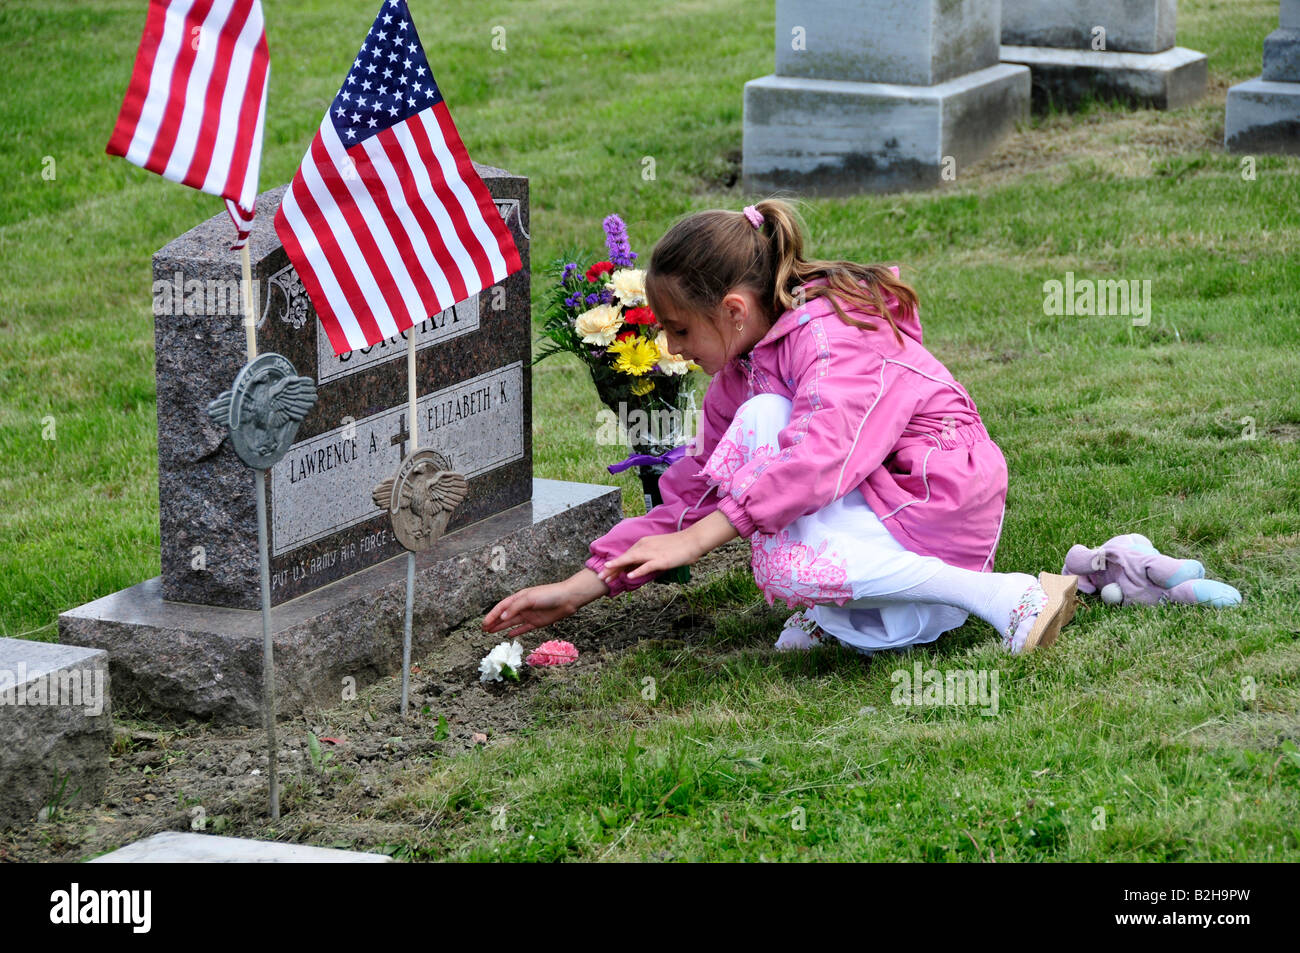 Family places flowers at gravesite Stock Photo